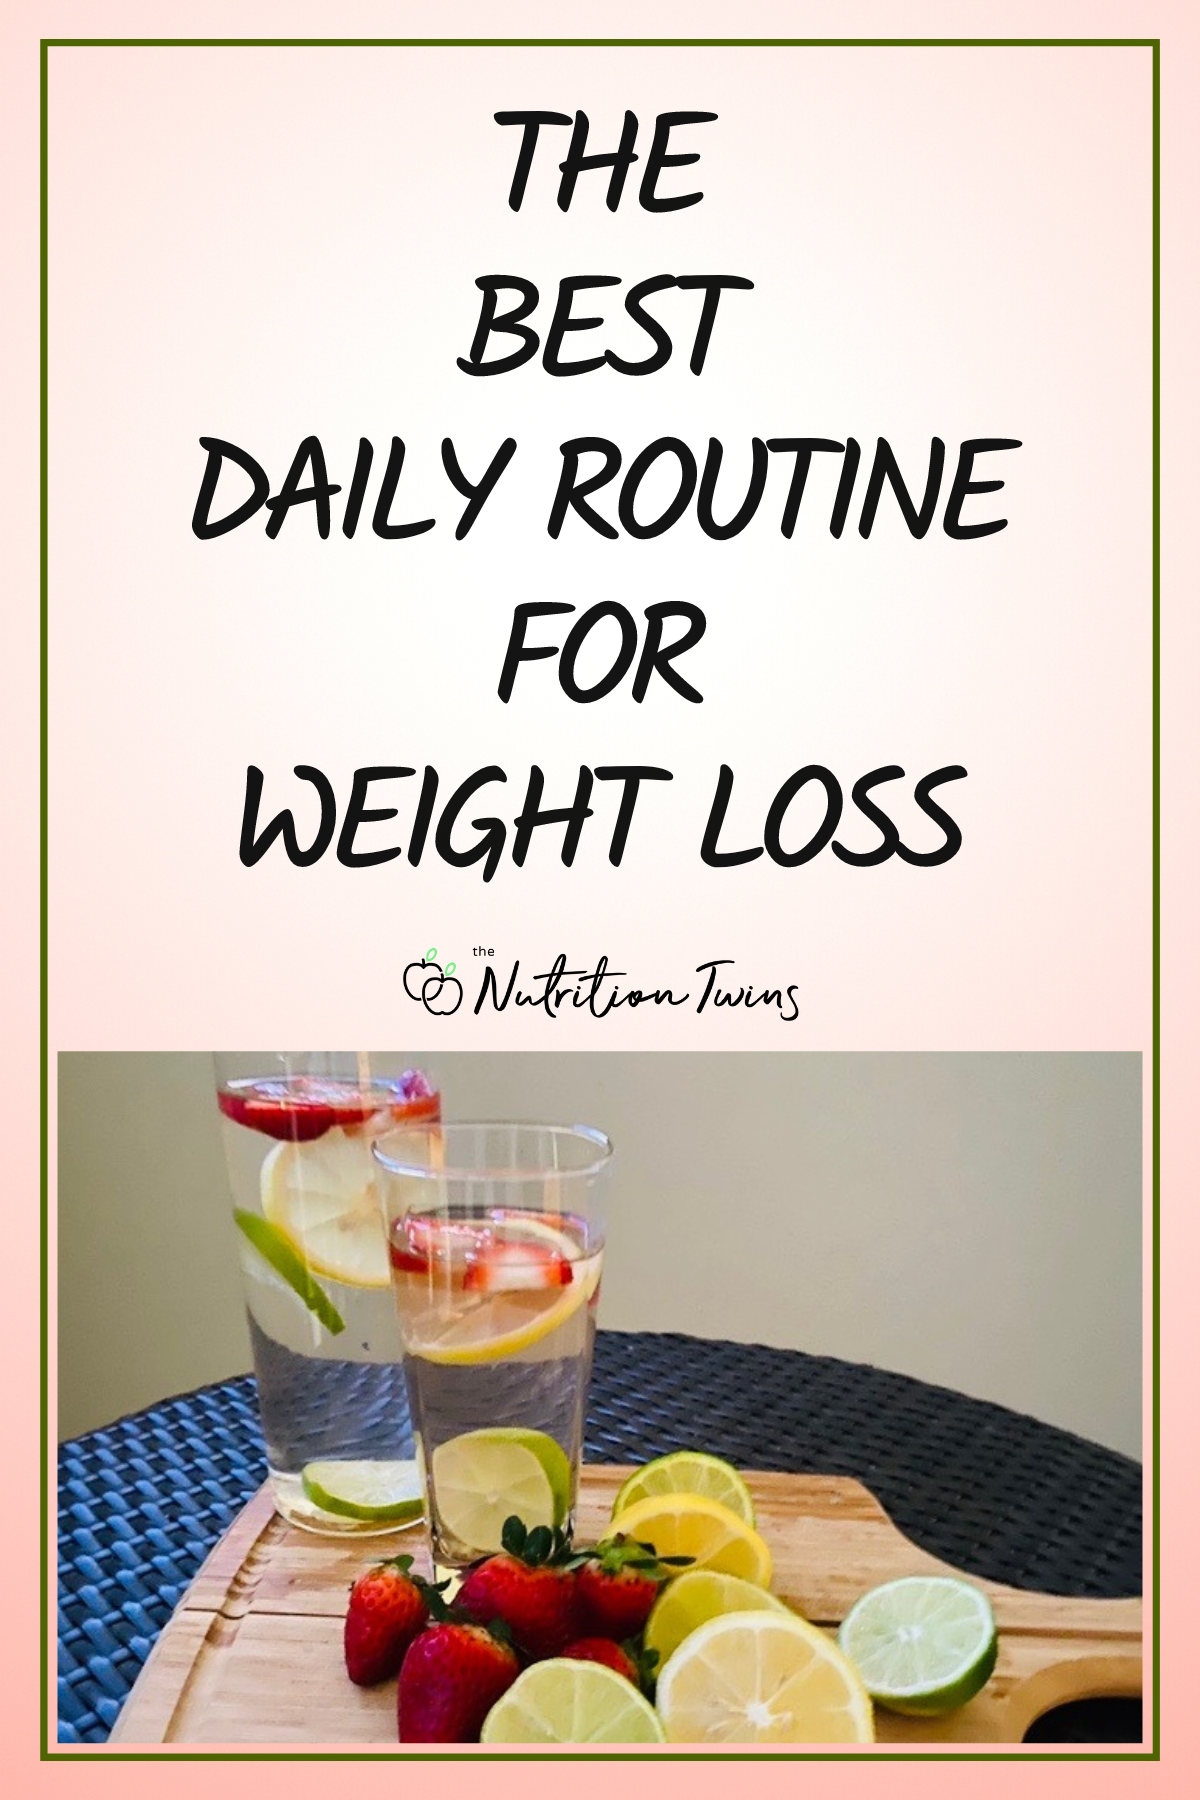 The Best Daily Routine for Weight Loss glasses of water with strawberries, lemons and limes on cutting board